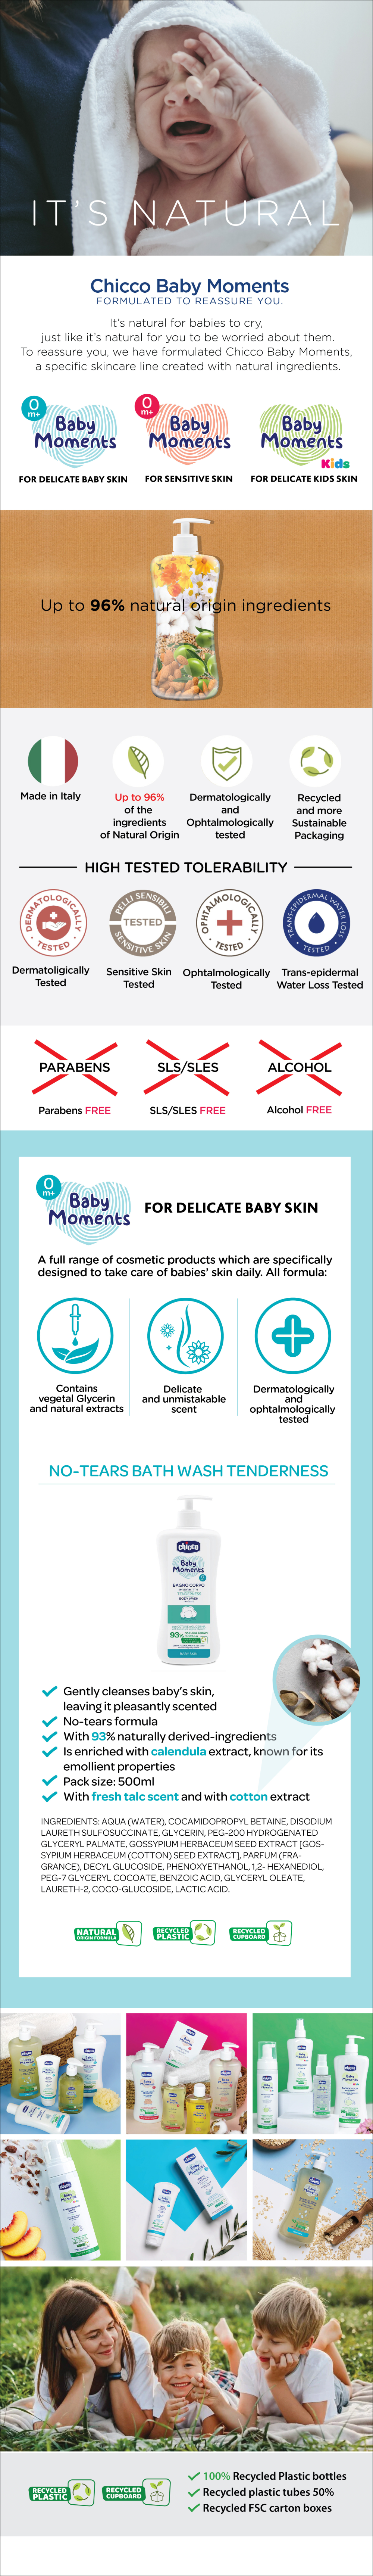 (Baby Skin) Chicco Baby Moments No-Tears Body Wash Tenderness